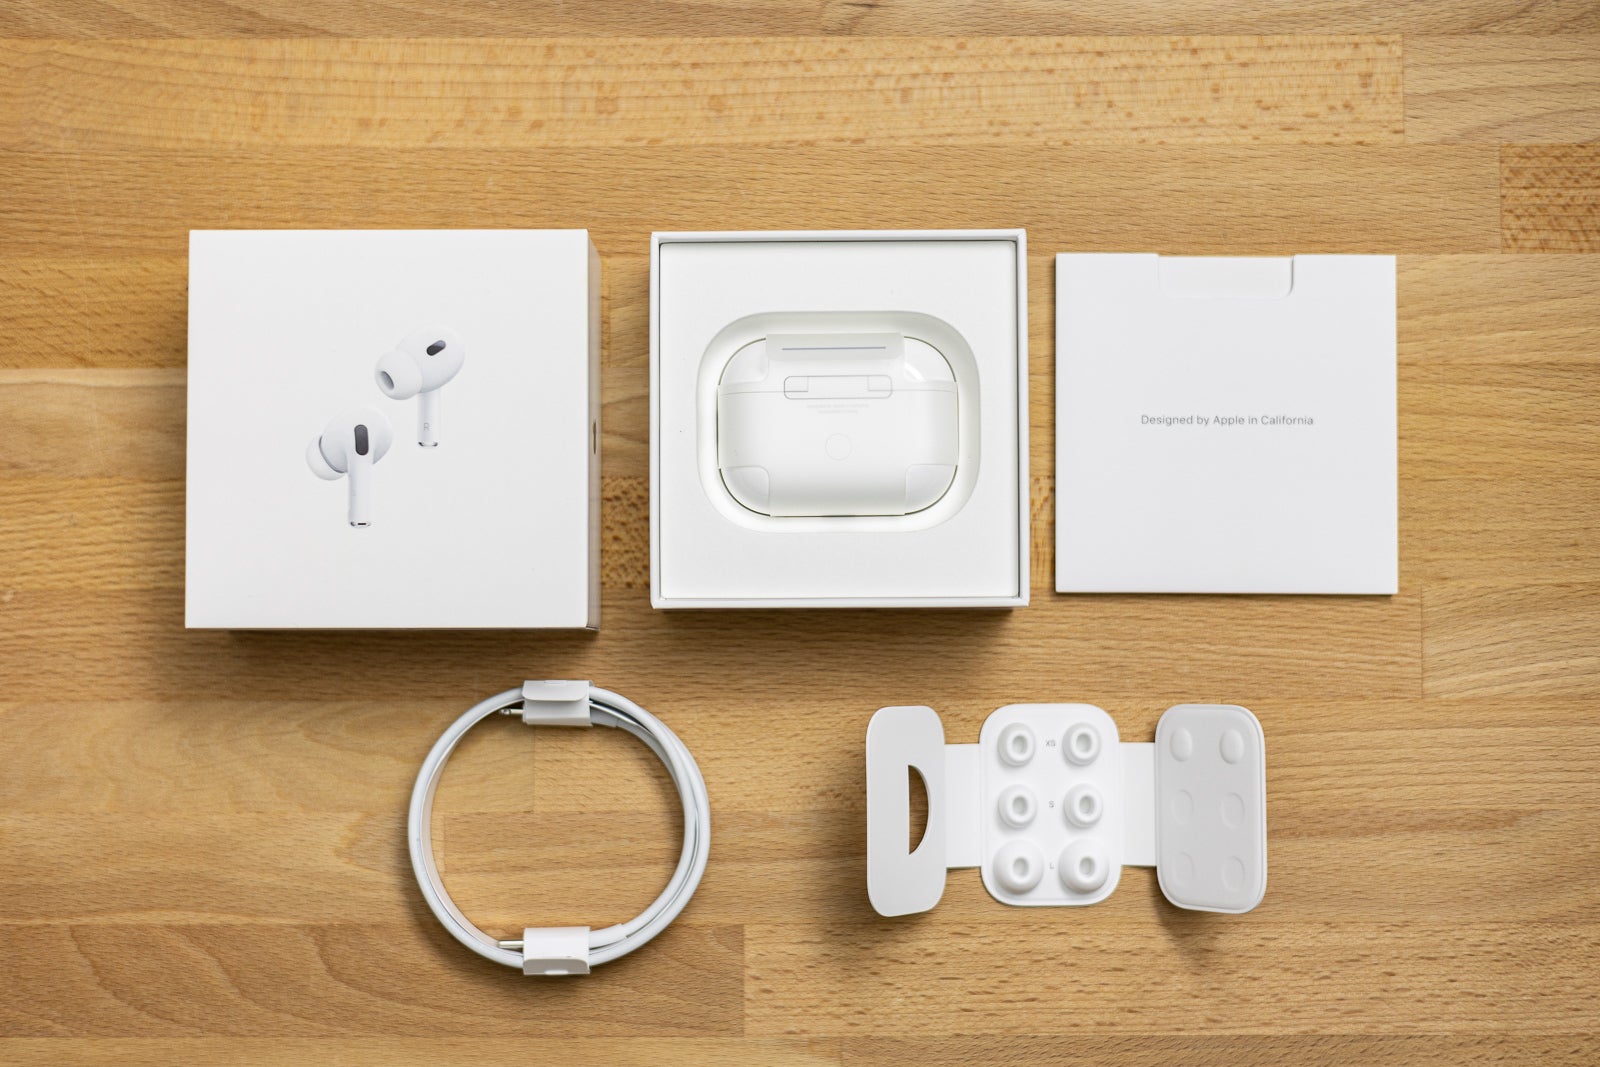 (Image Credit - PhoneArena) AirPods Pro 2 box contents - AirPods Pro 2 review: Closer to perfection